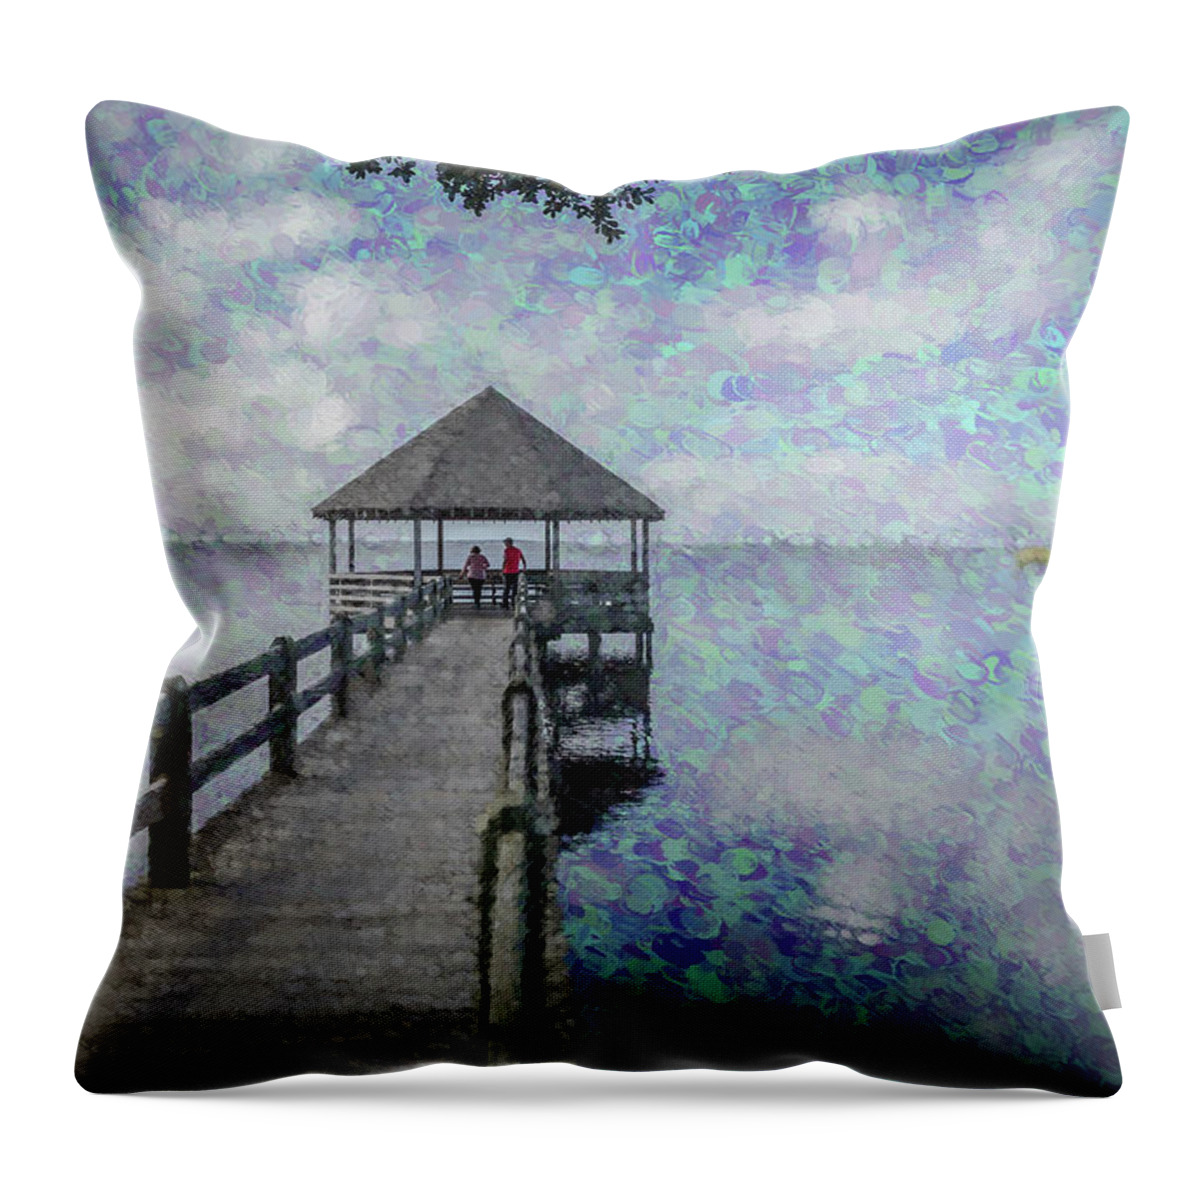 2016 Throw Pillow featuring the photograph Dreaming Together by Wade Brooks